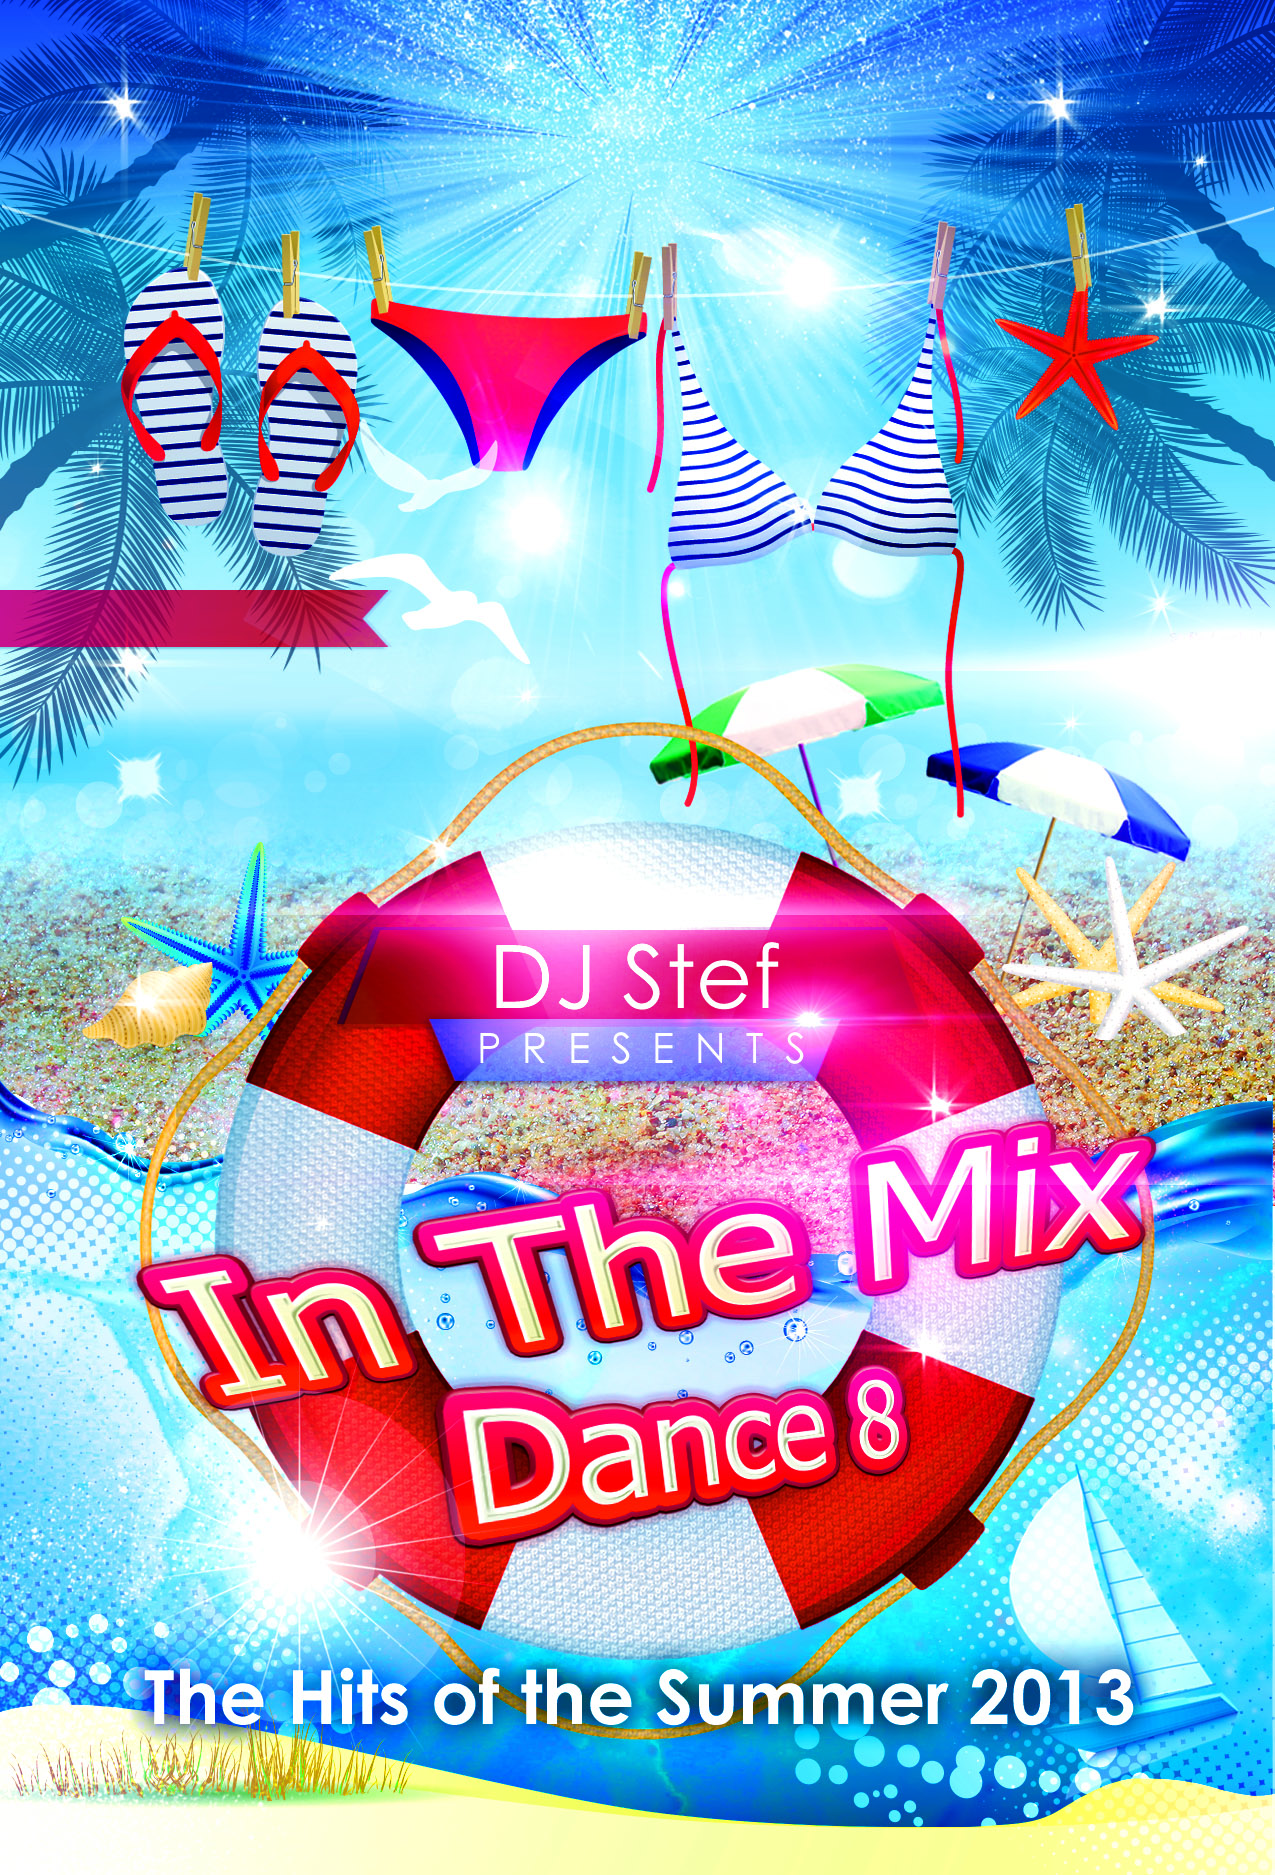 In The Mix Dance 8